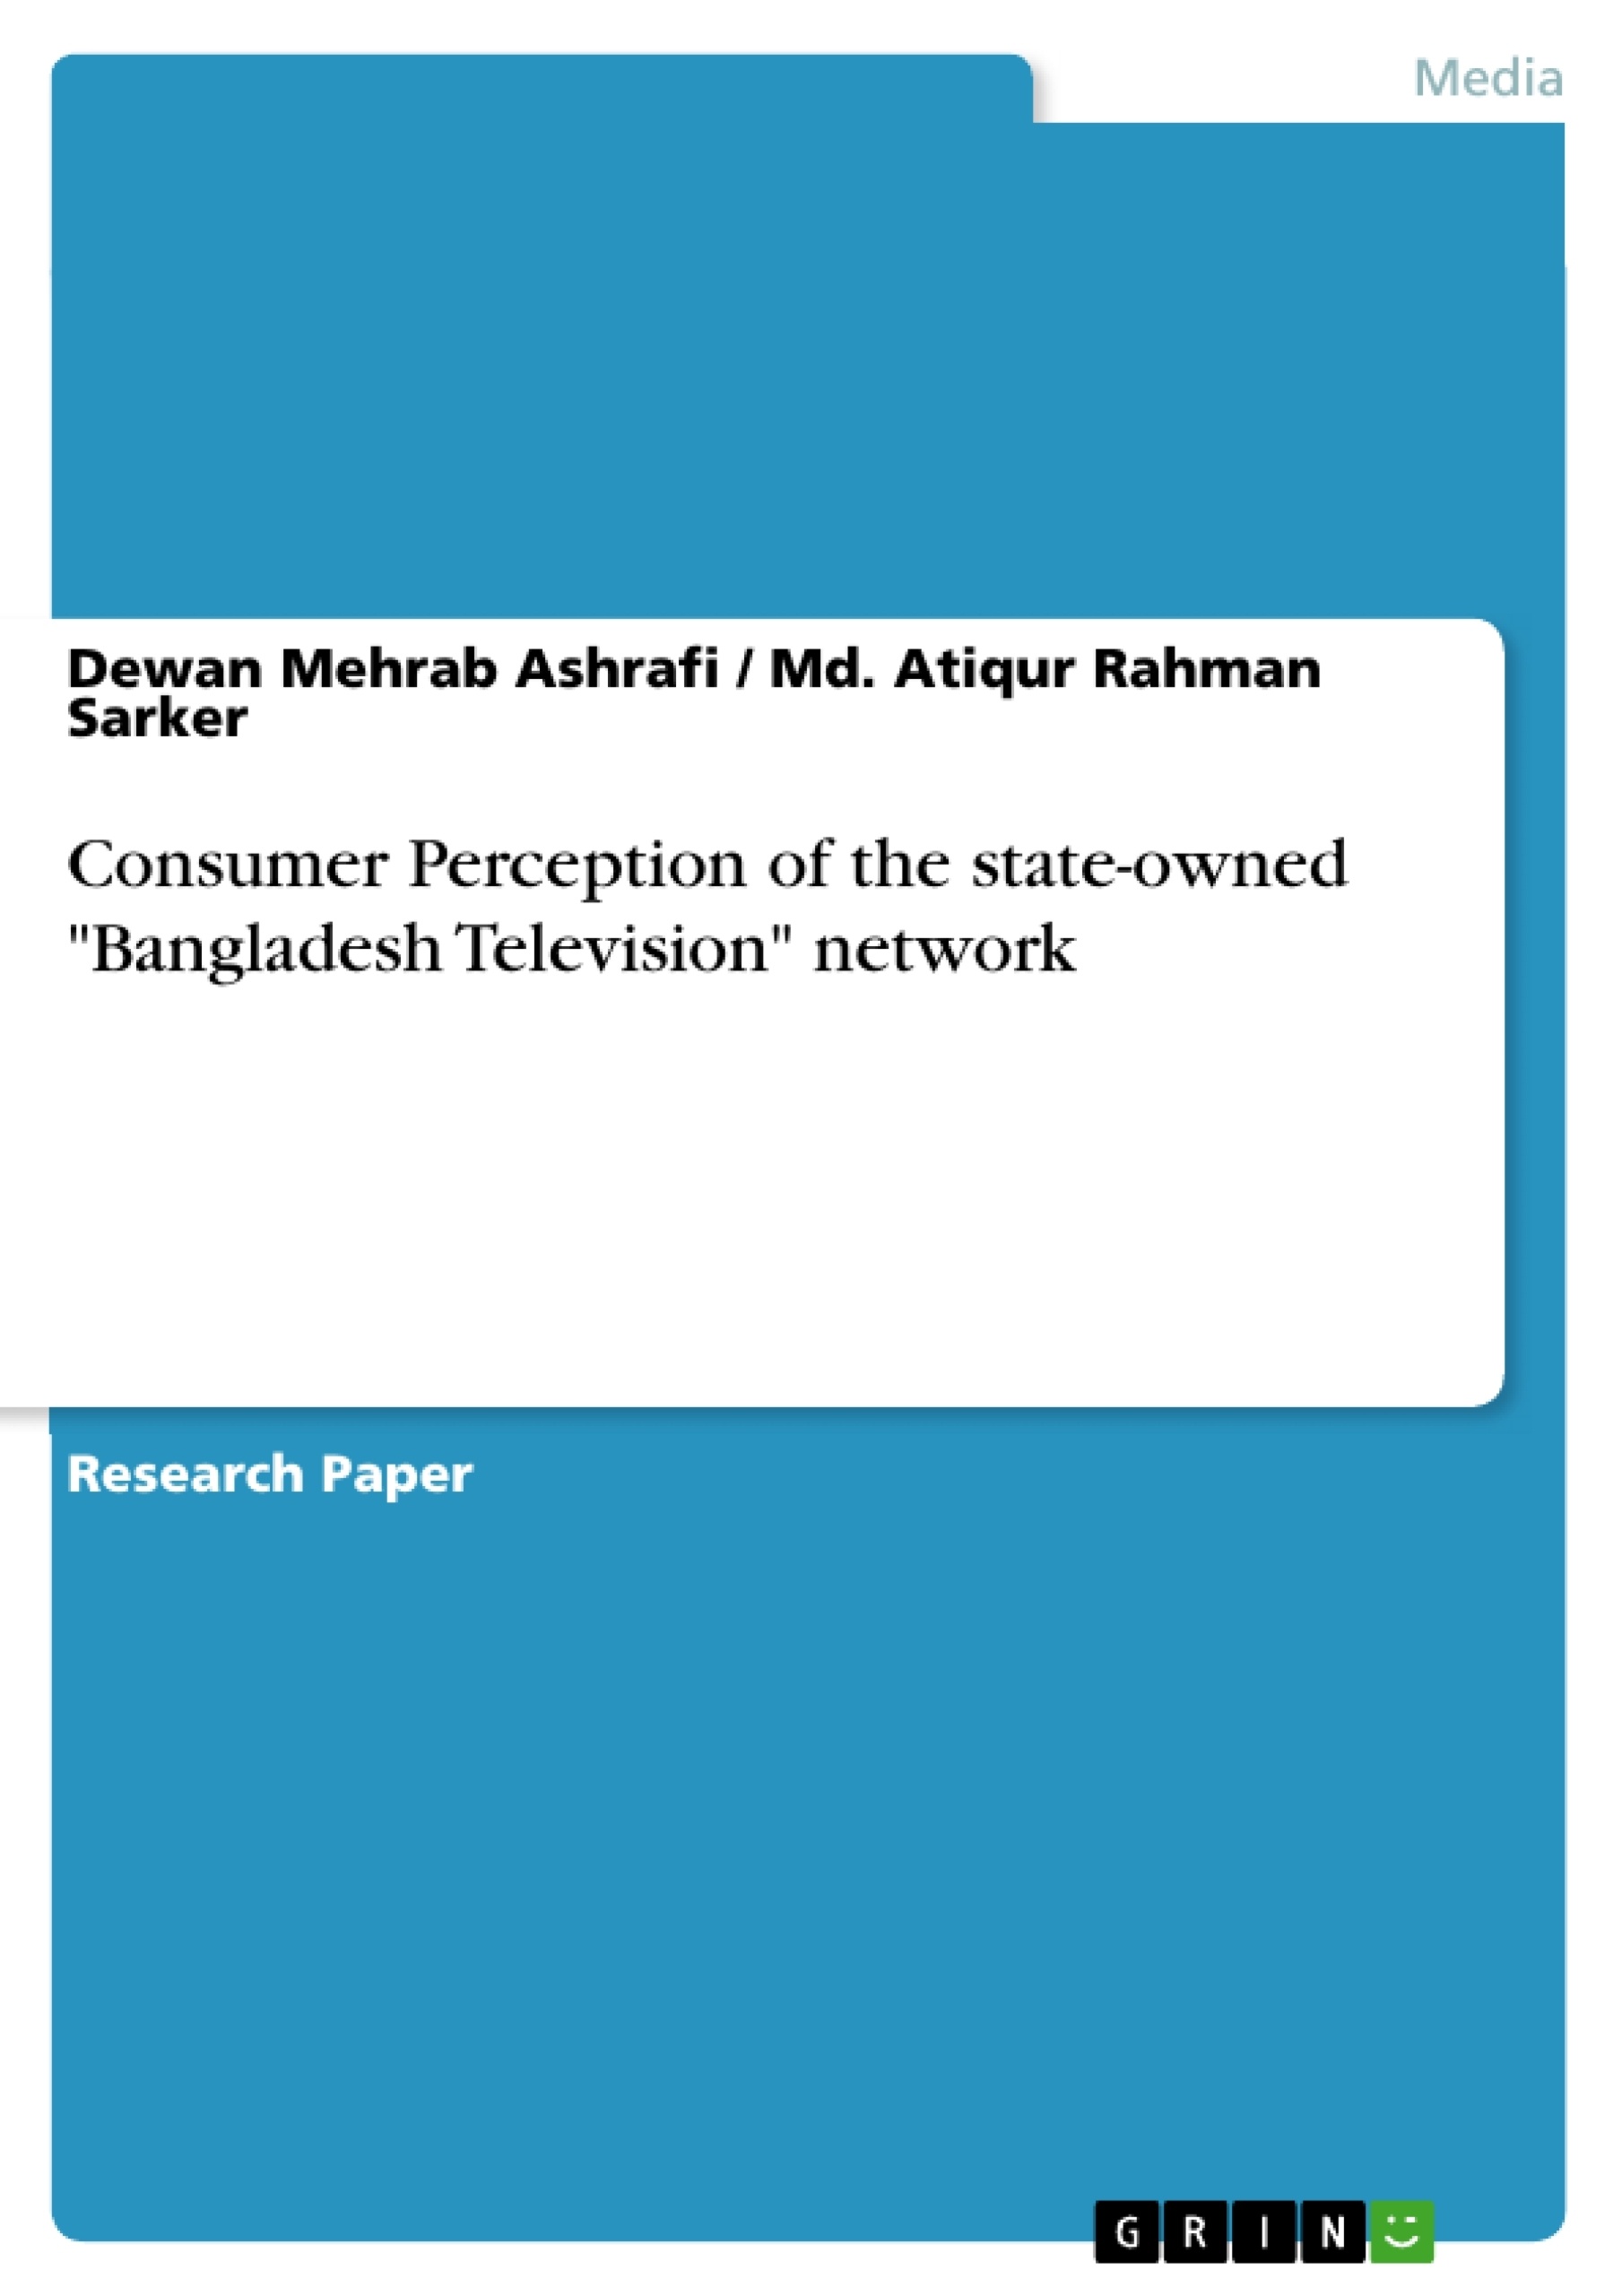 Título: Consumer Perception of the state-owned "Bangladesh Television" network